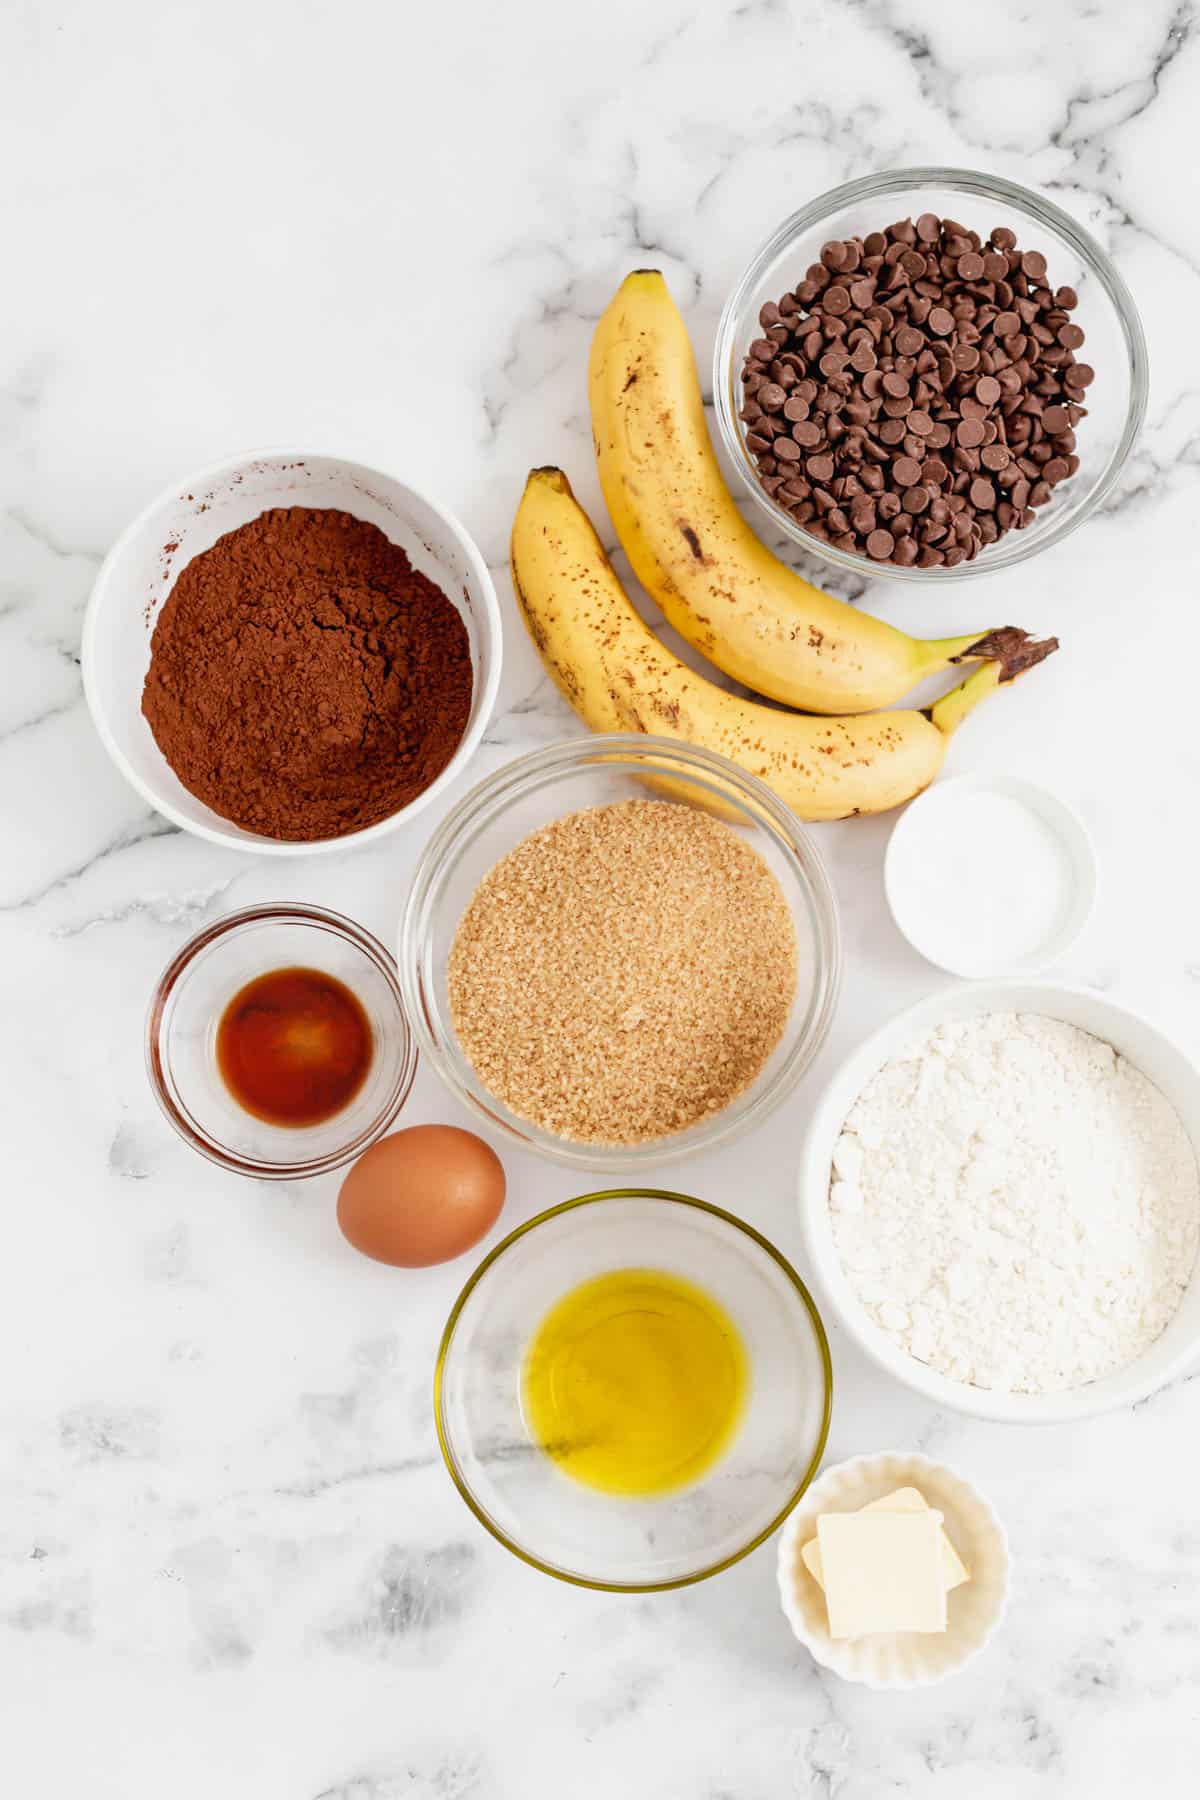 Ingredients for chocolate banana bread in separate bowls.